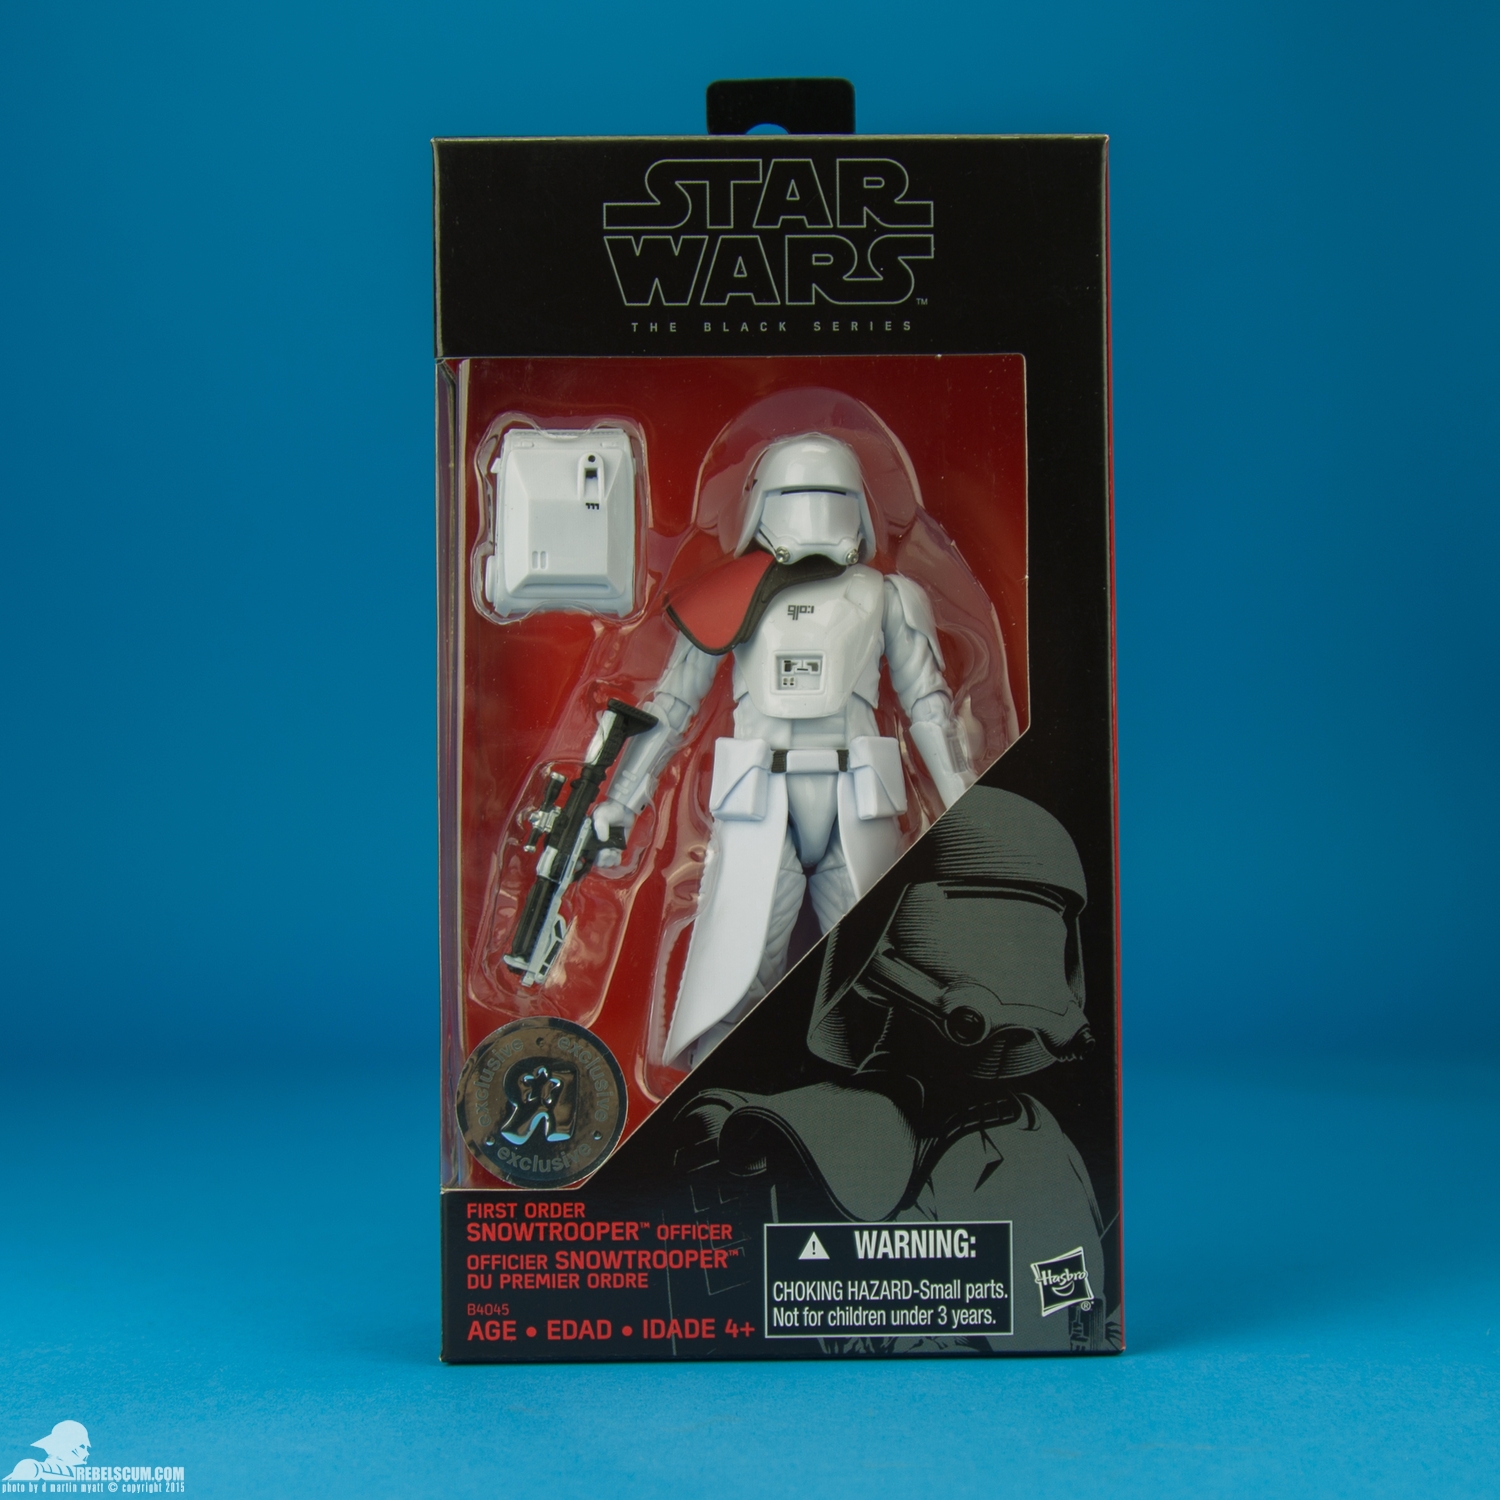 First-Order-Snowtrooper-Officer-The-Black-Series-6-inch-012.jpg